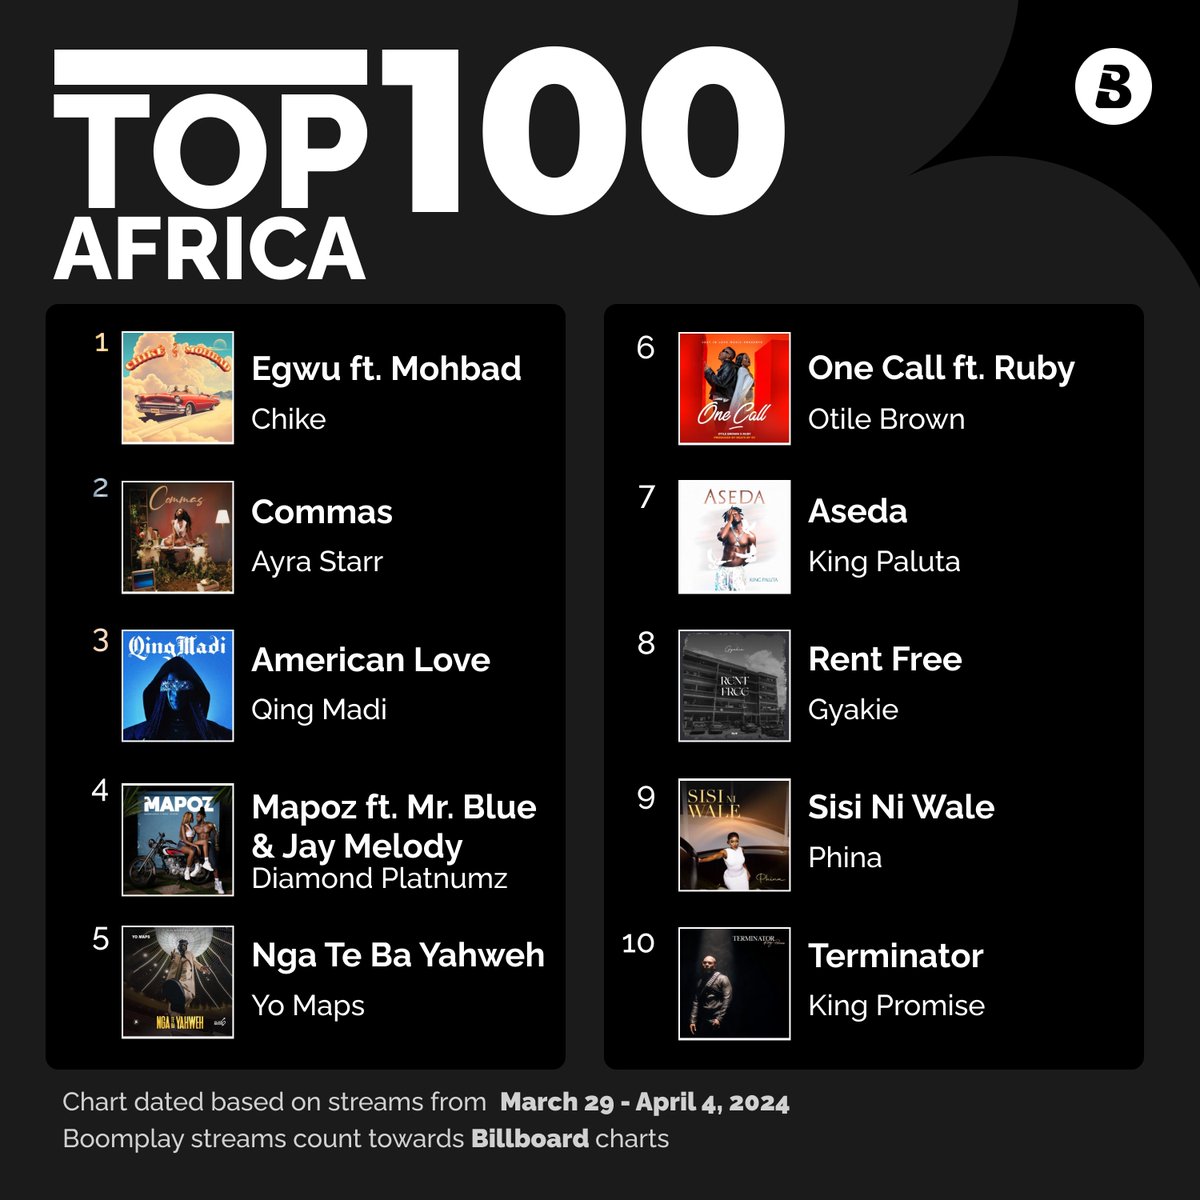 Congratulations to @YoMapsofficial on his new single #NgaTeBaYahweh making its debut on the #BoomplayAfricaTop100 Chart! Shoutout to #Egwu for holding the top spot for another week! Keep streaming your favourite tracks on #Boomplay!🔥 #Chike #AyraStarr #QingMadi #YoMaps